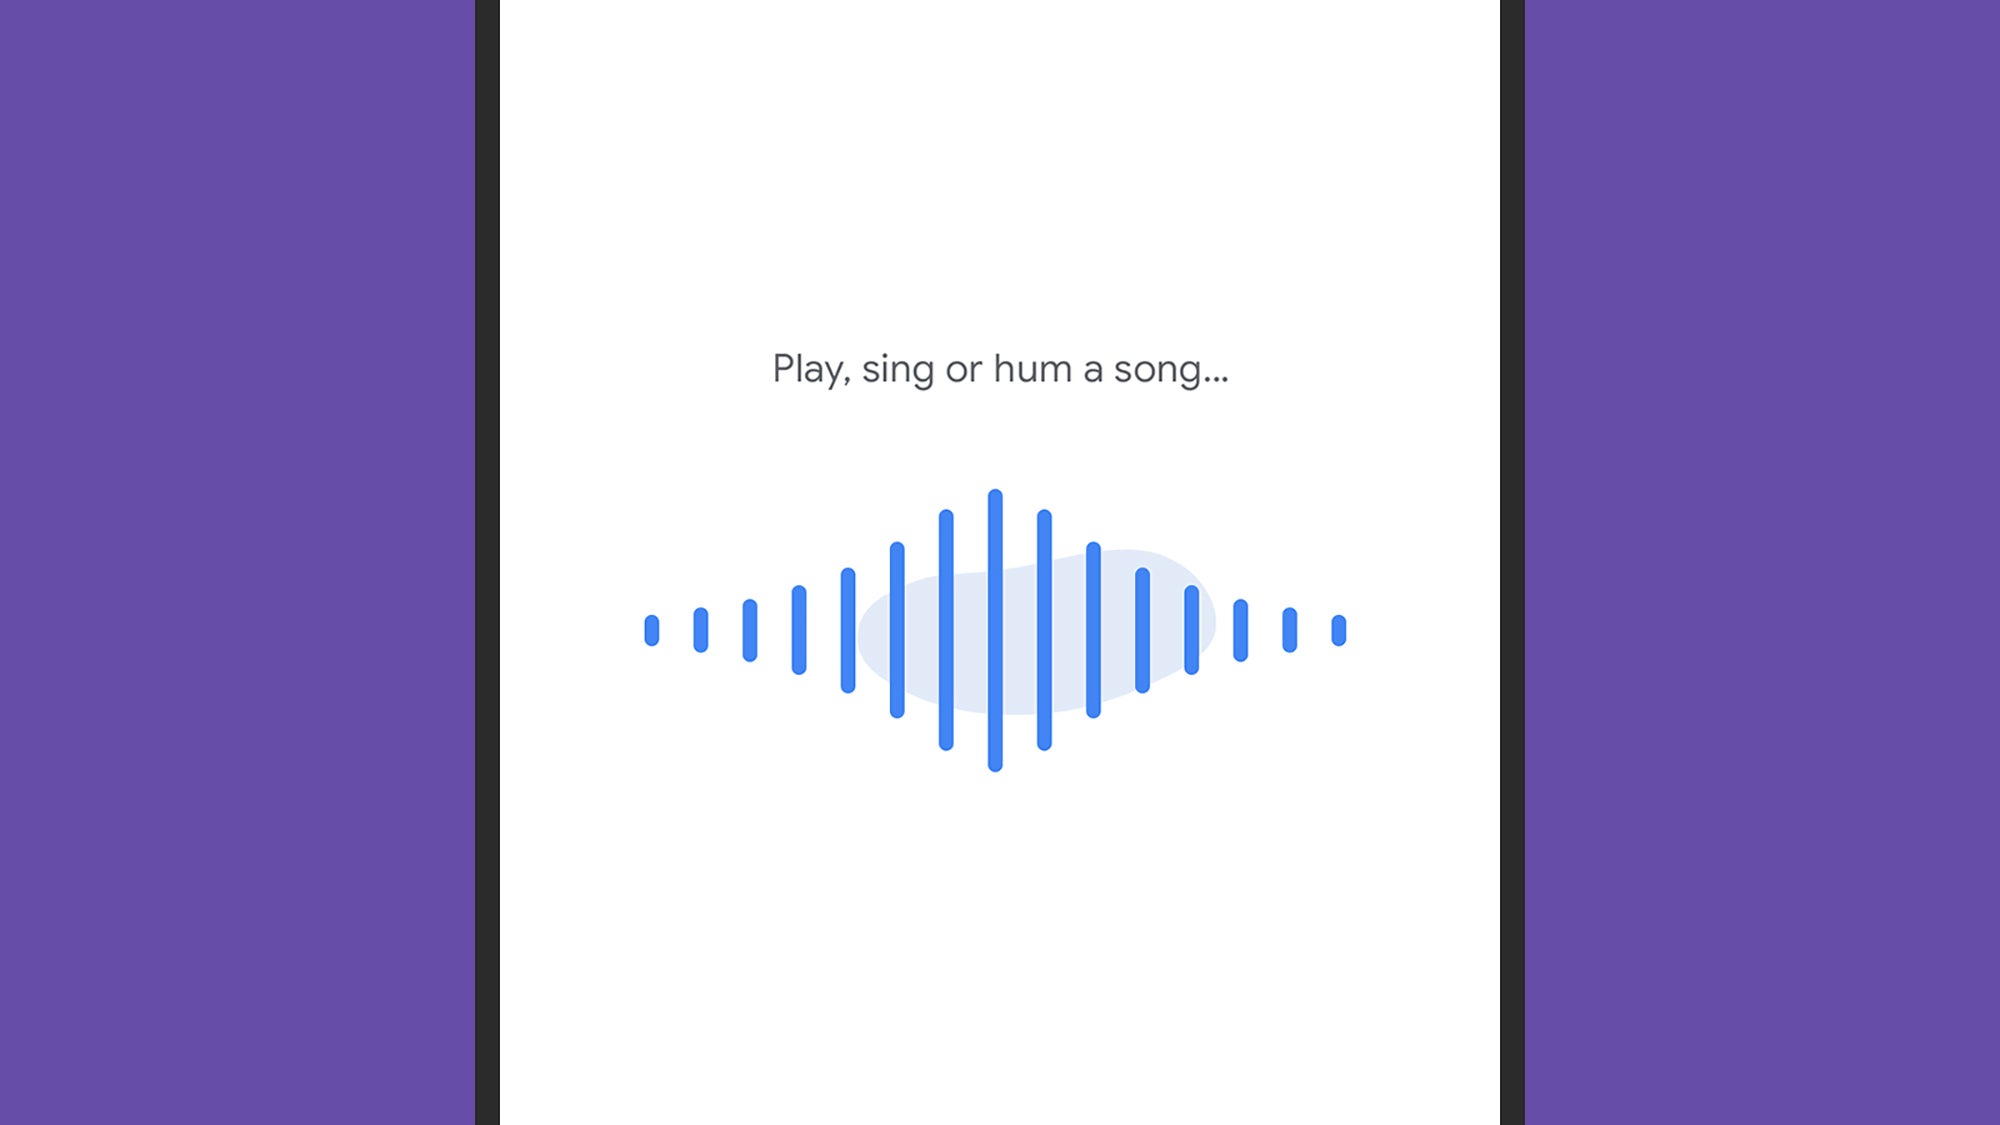 Google Assistant will try its best to identify a song for you. 